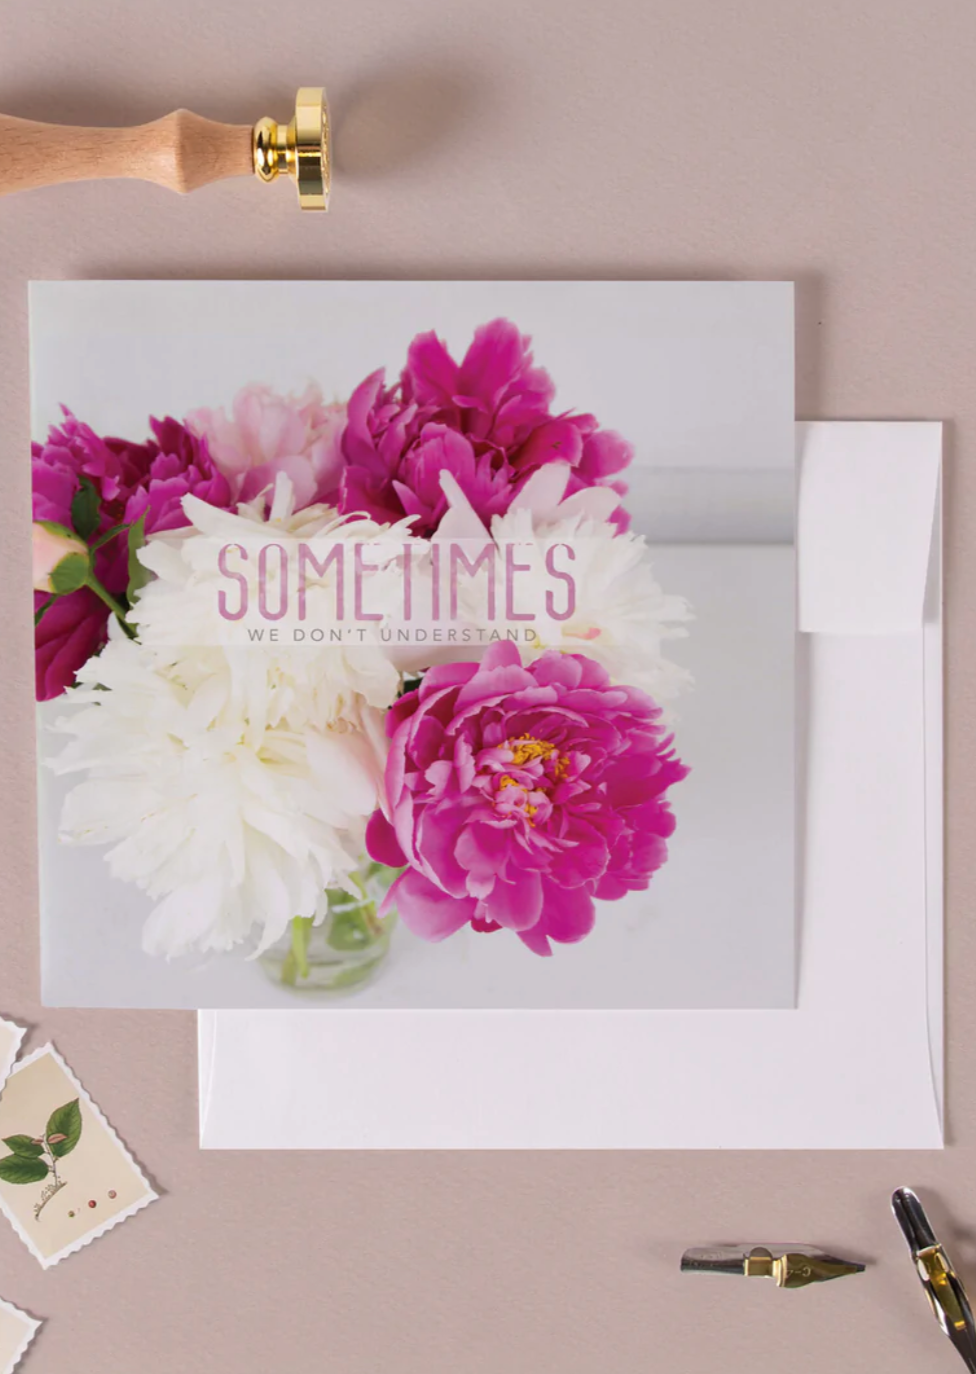 Sympathy Greeting Cards Gifts Sometimes We Don't Understand